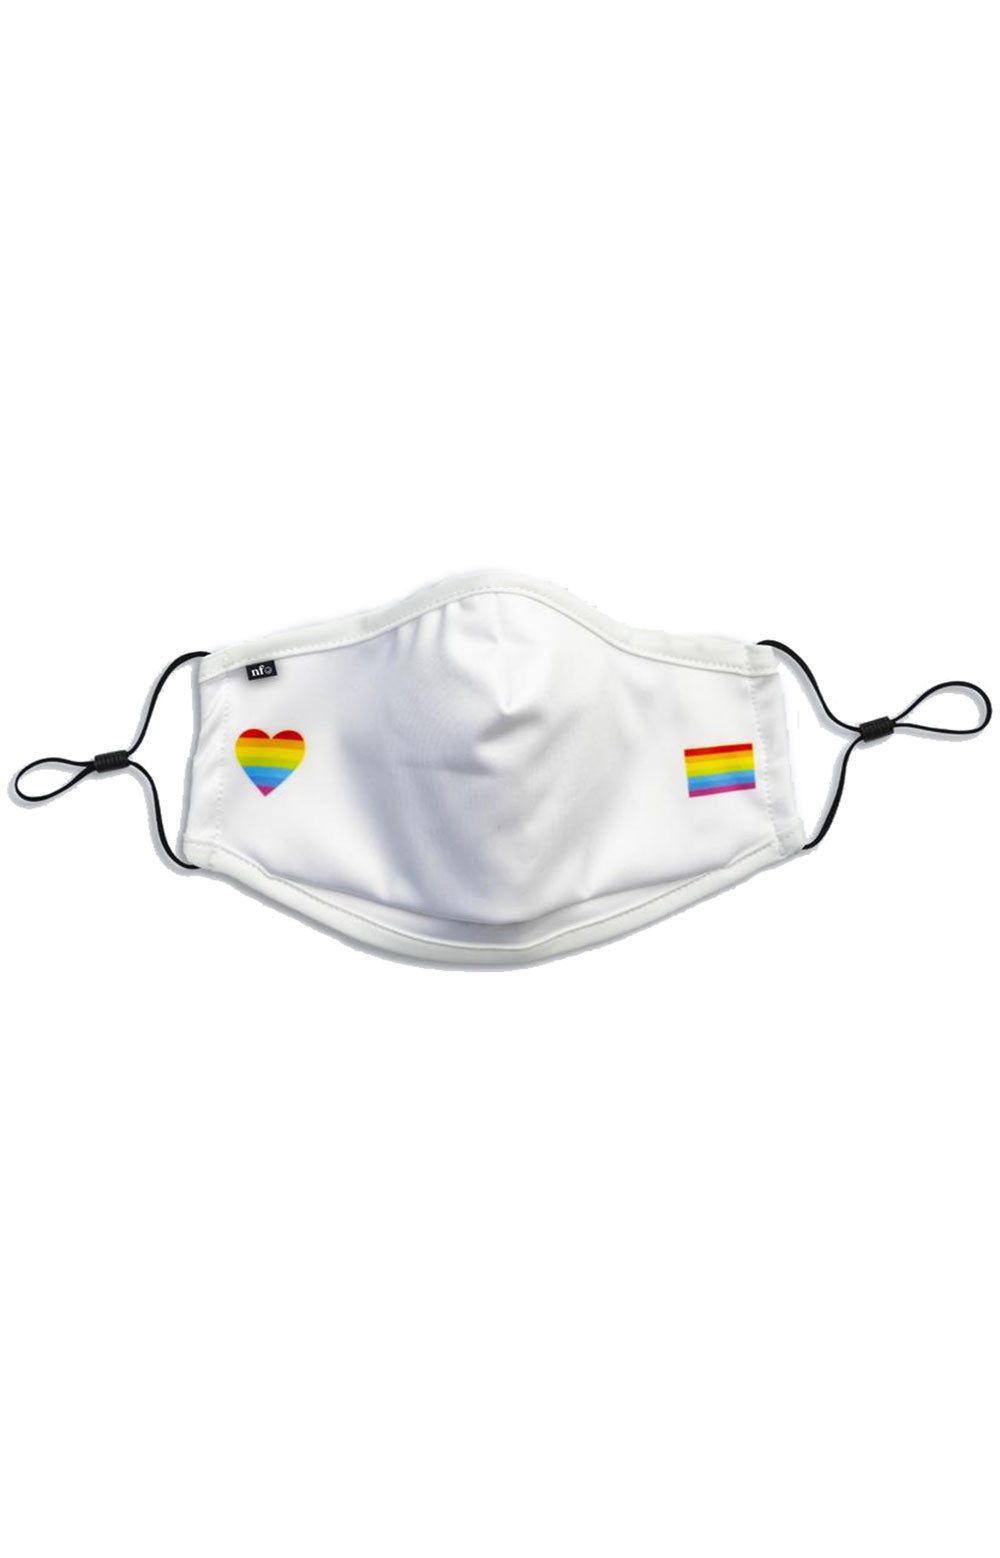 Adult Anti Bacterial Knit Face Mask - Pride